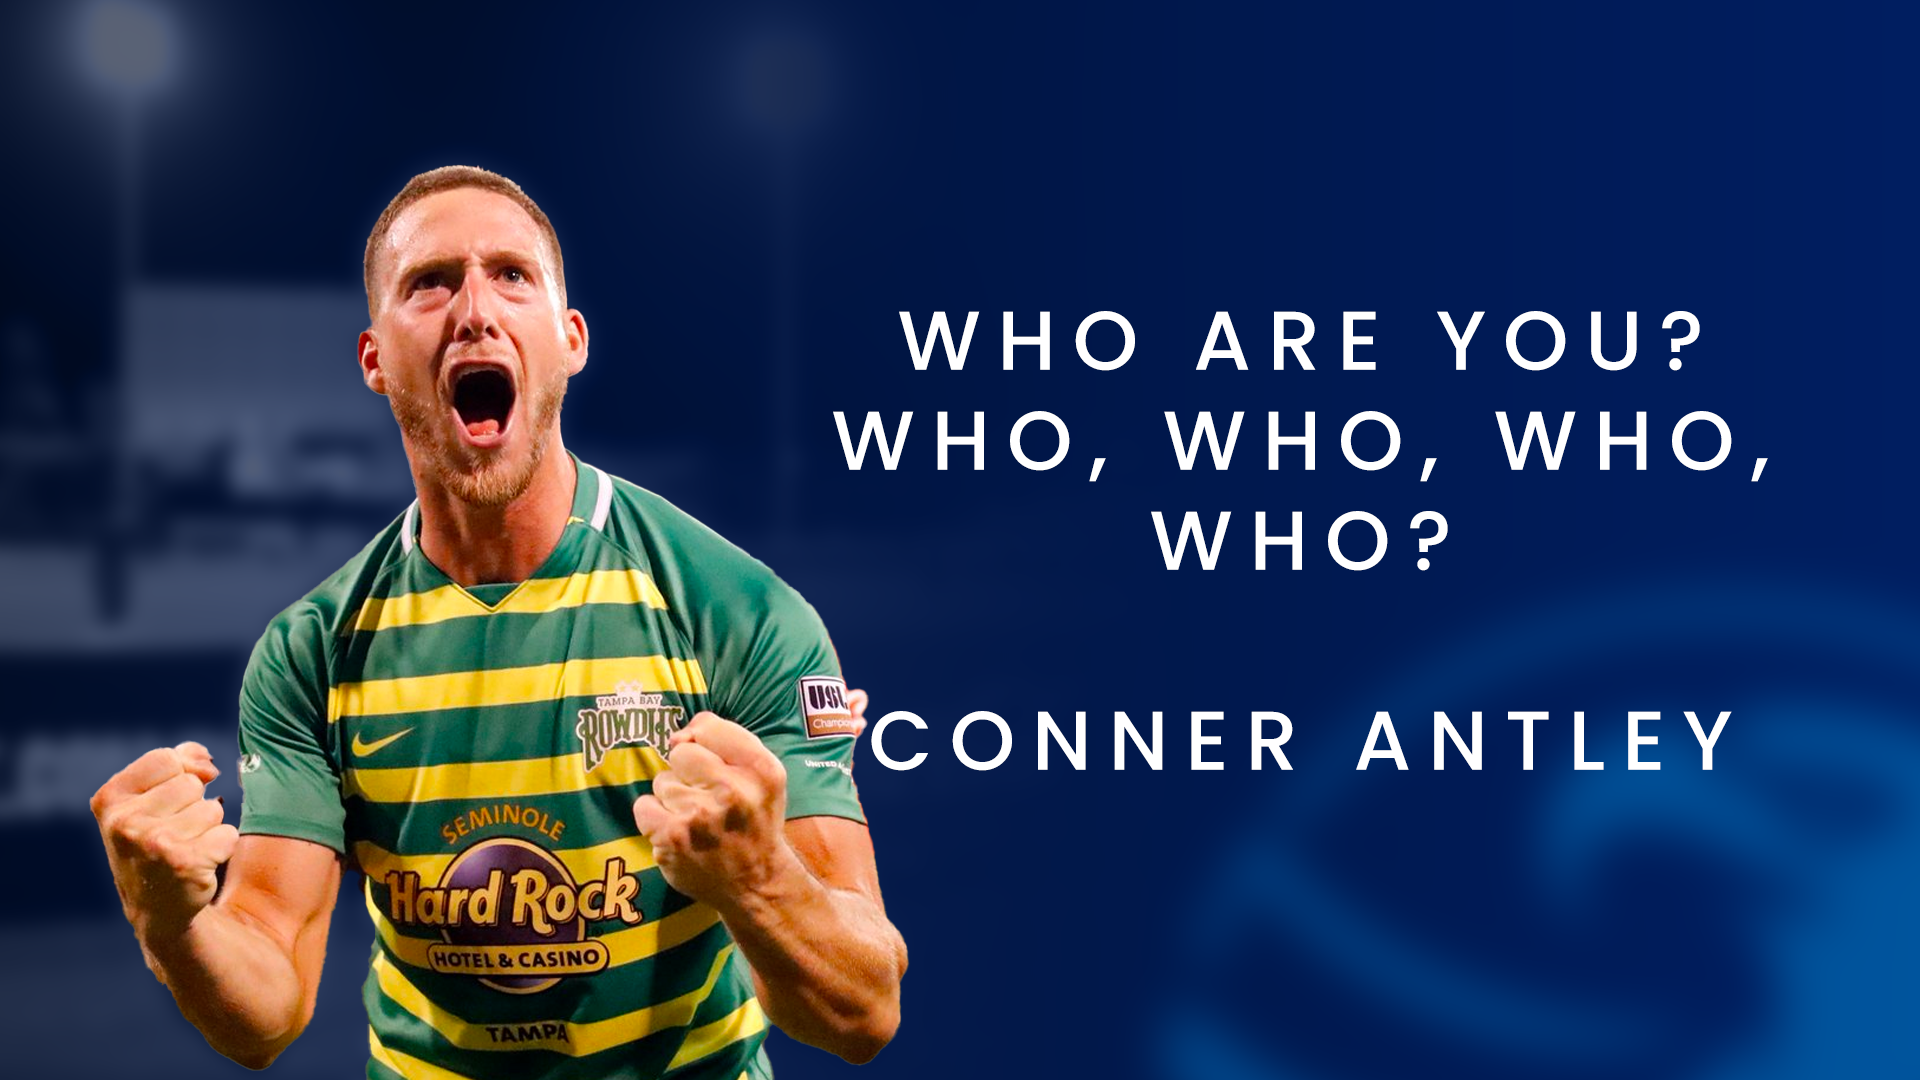 Who Are You? Who, who, who, who? Conner Antley